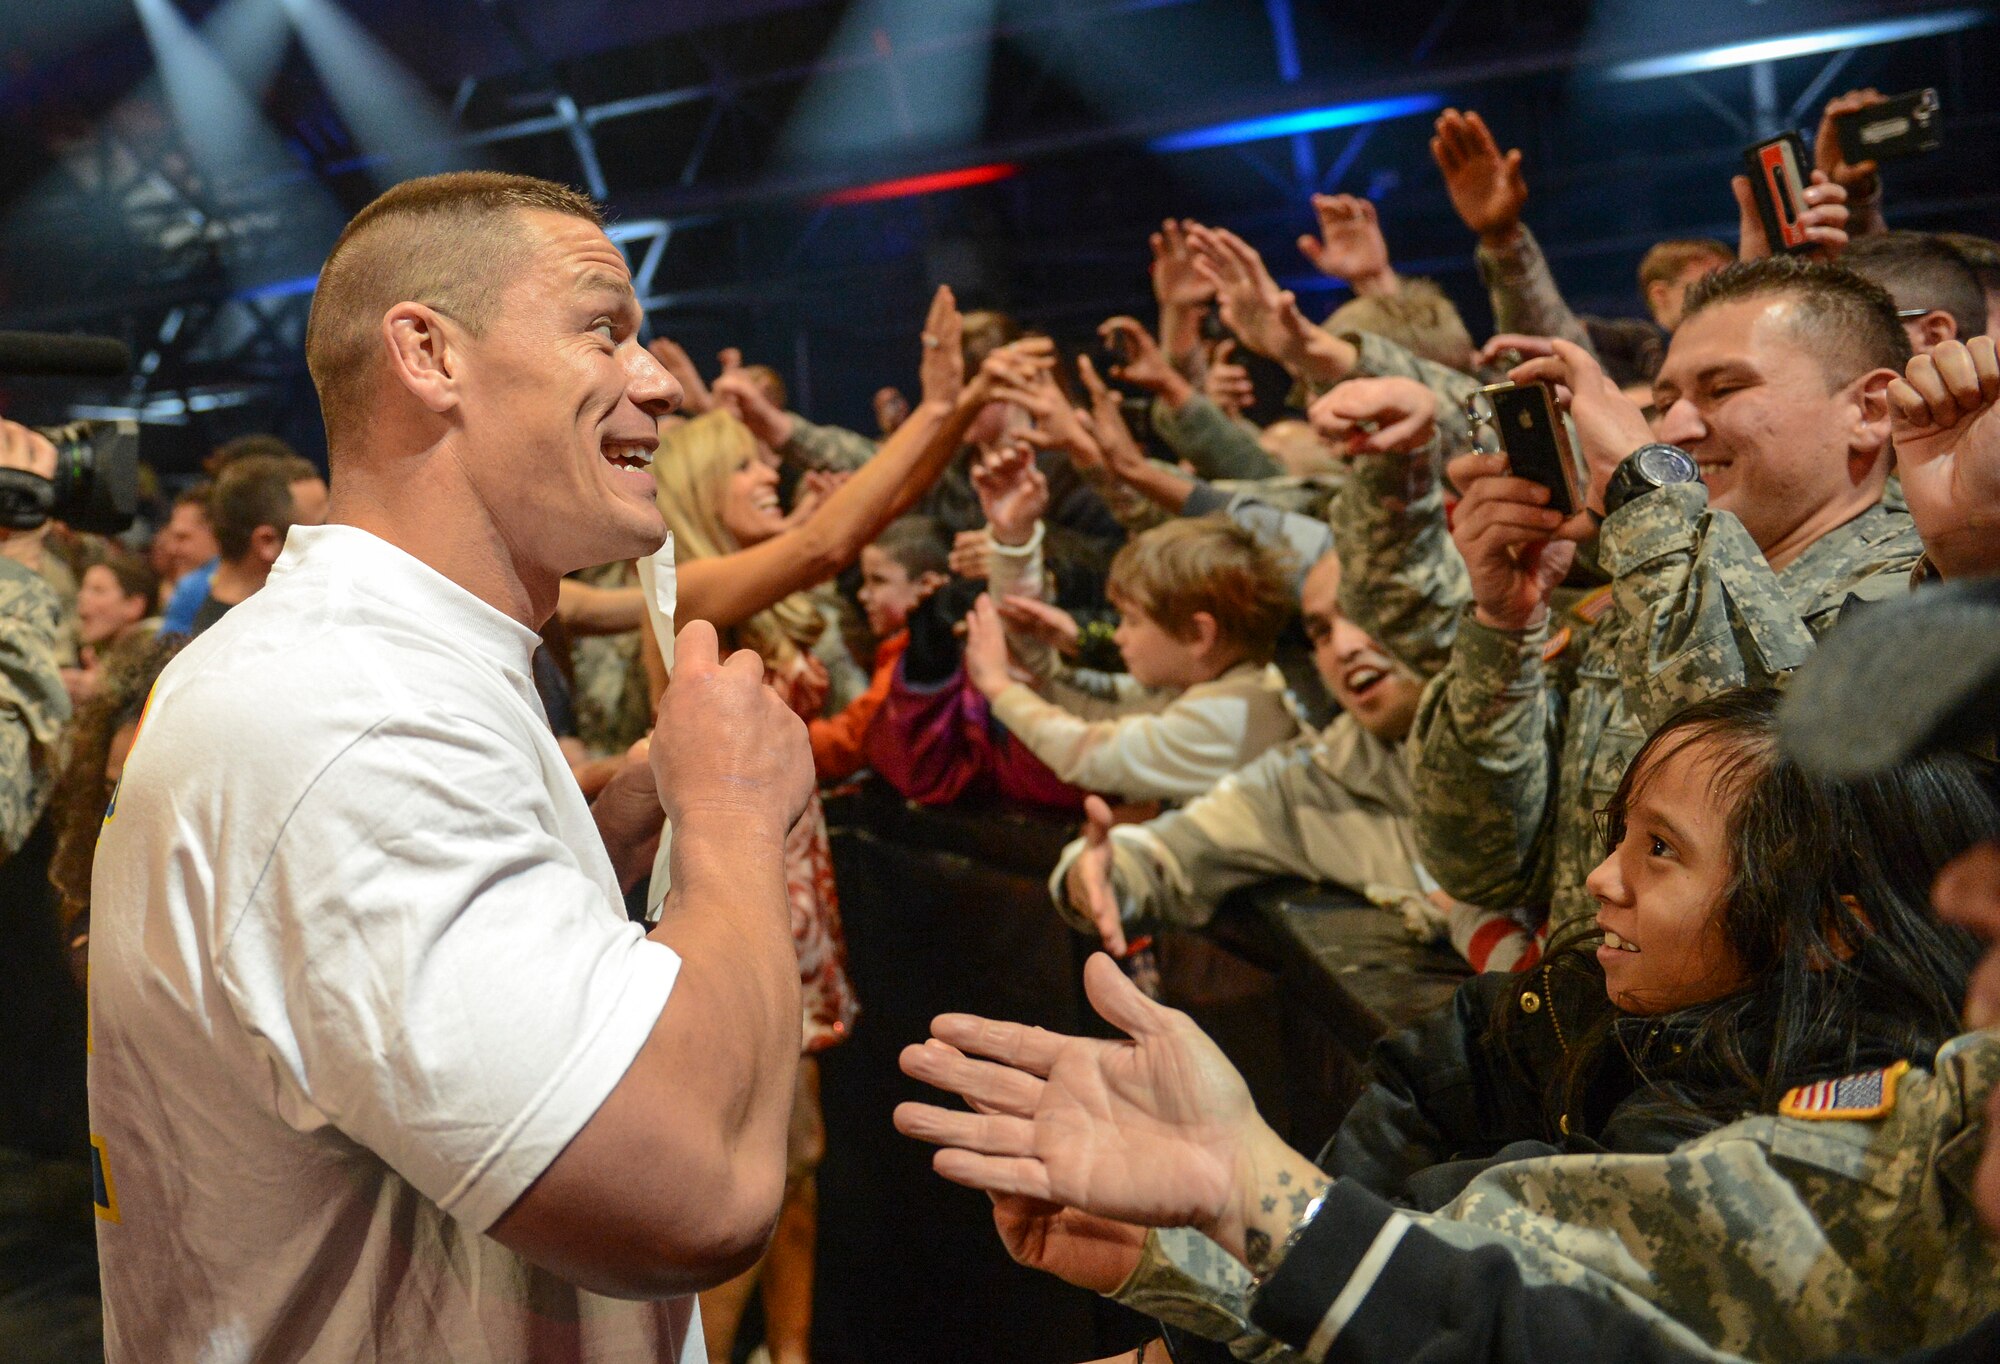 World Wrestling Entertainment superstar John Cena, poses for photos, Dec. 11, 2013, at the conclusion of the WWE Tribute to the Troops event at Joint Base Lewis-McChord, Wash. The event featured wrestling matches by 40 WWE superstars and divas, along with performances by comedian Jeff Dunham and rock band Daughtry. (U.S. Air Force photo/Tech. Sgt. Sean Tobin)